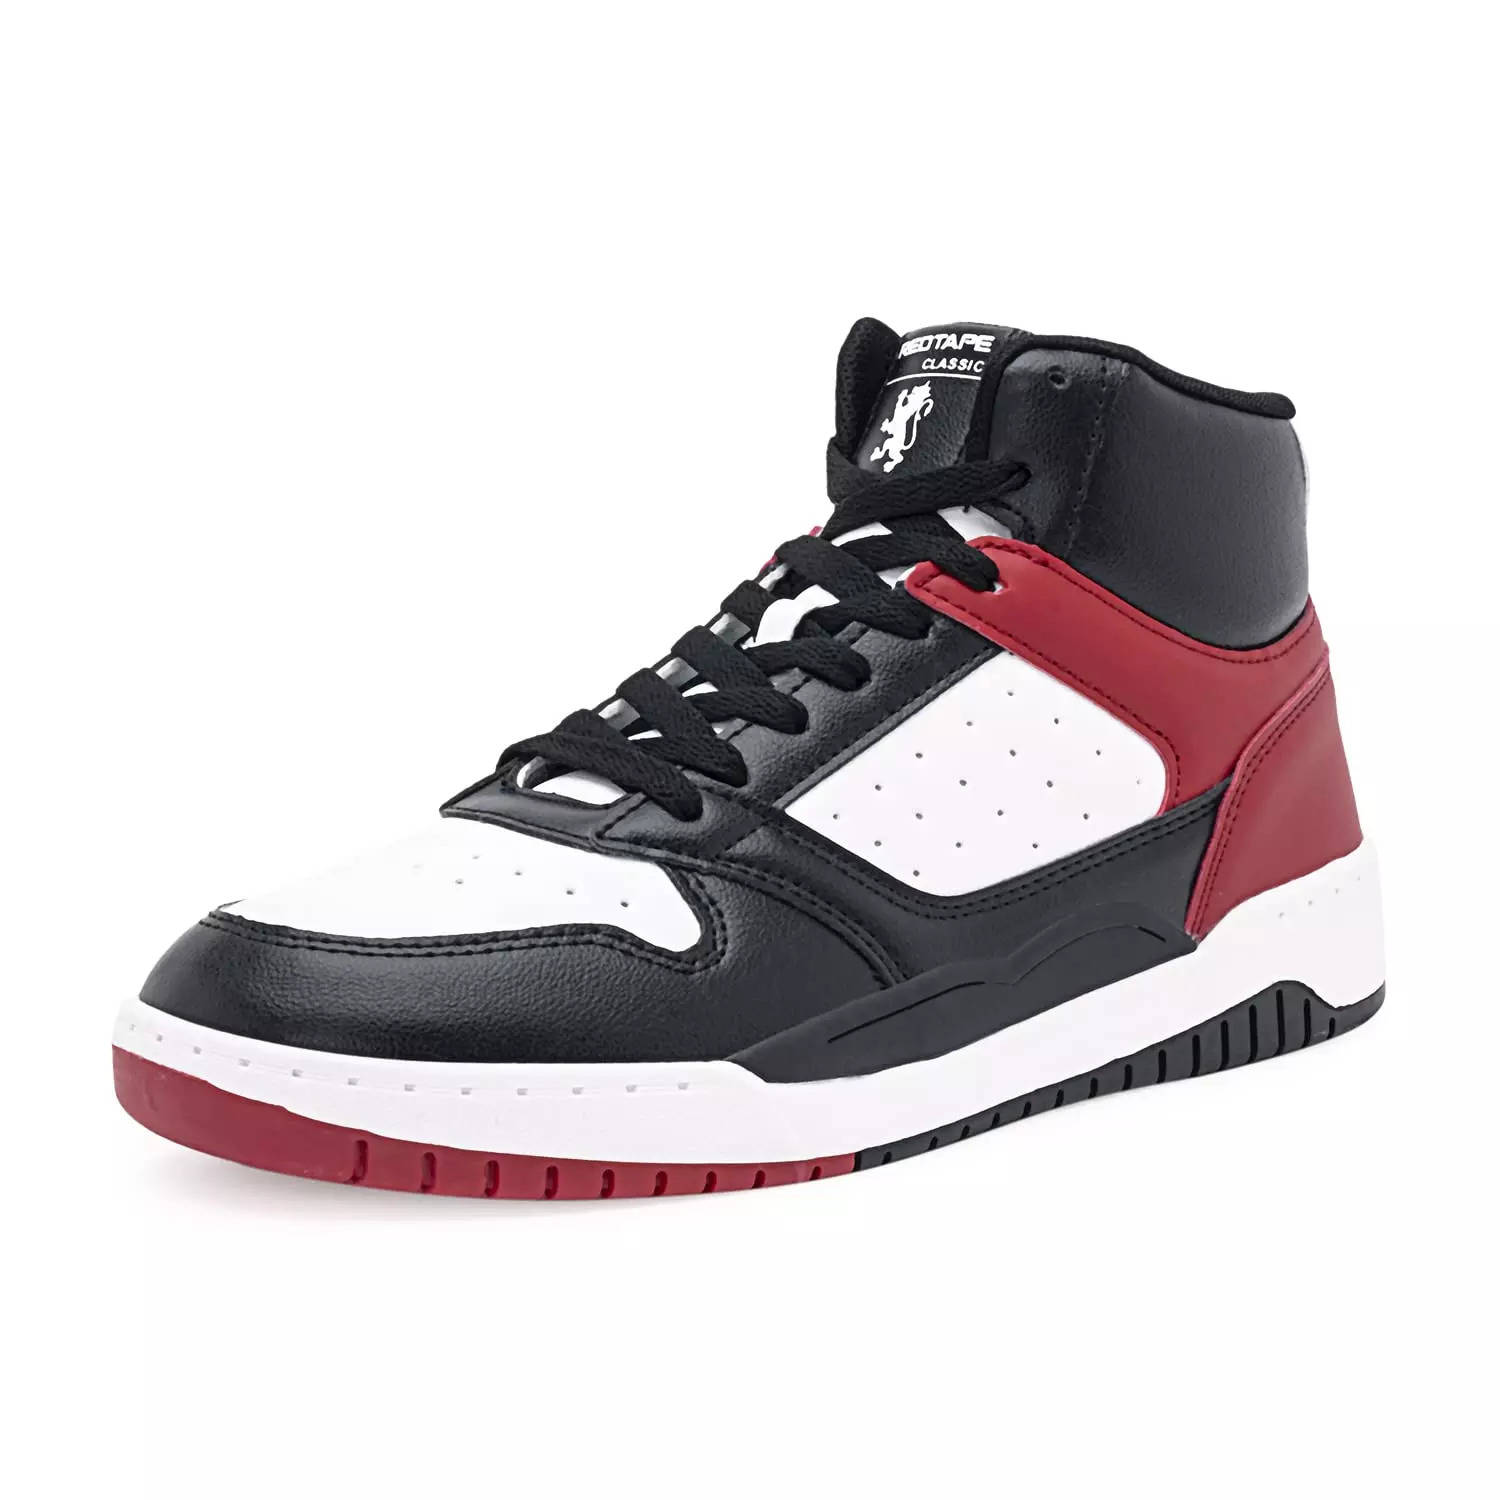 Red Tape Sneakers for Men: Find 6 Best Red Tape Sneakers for Men at ...